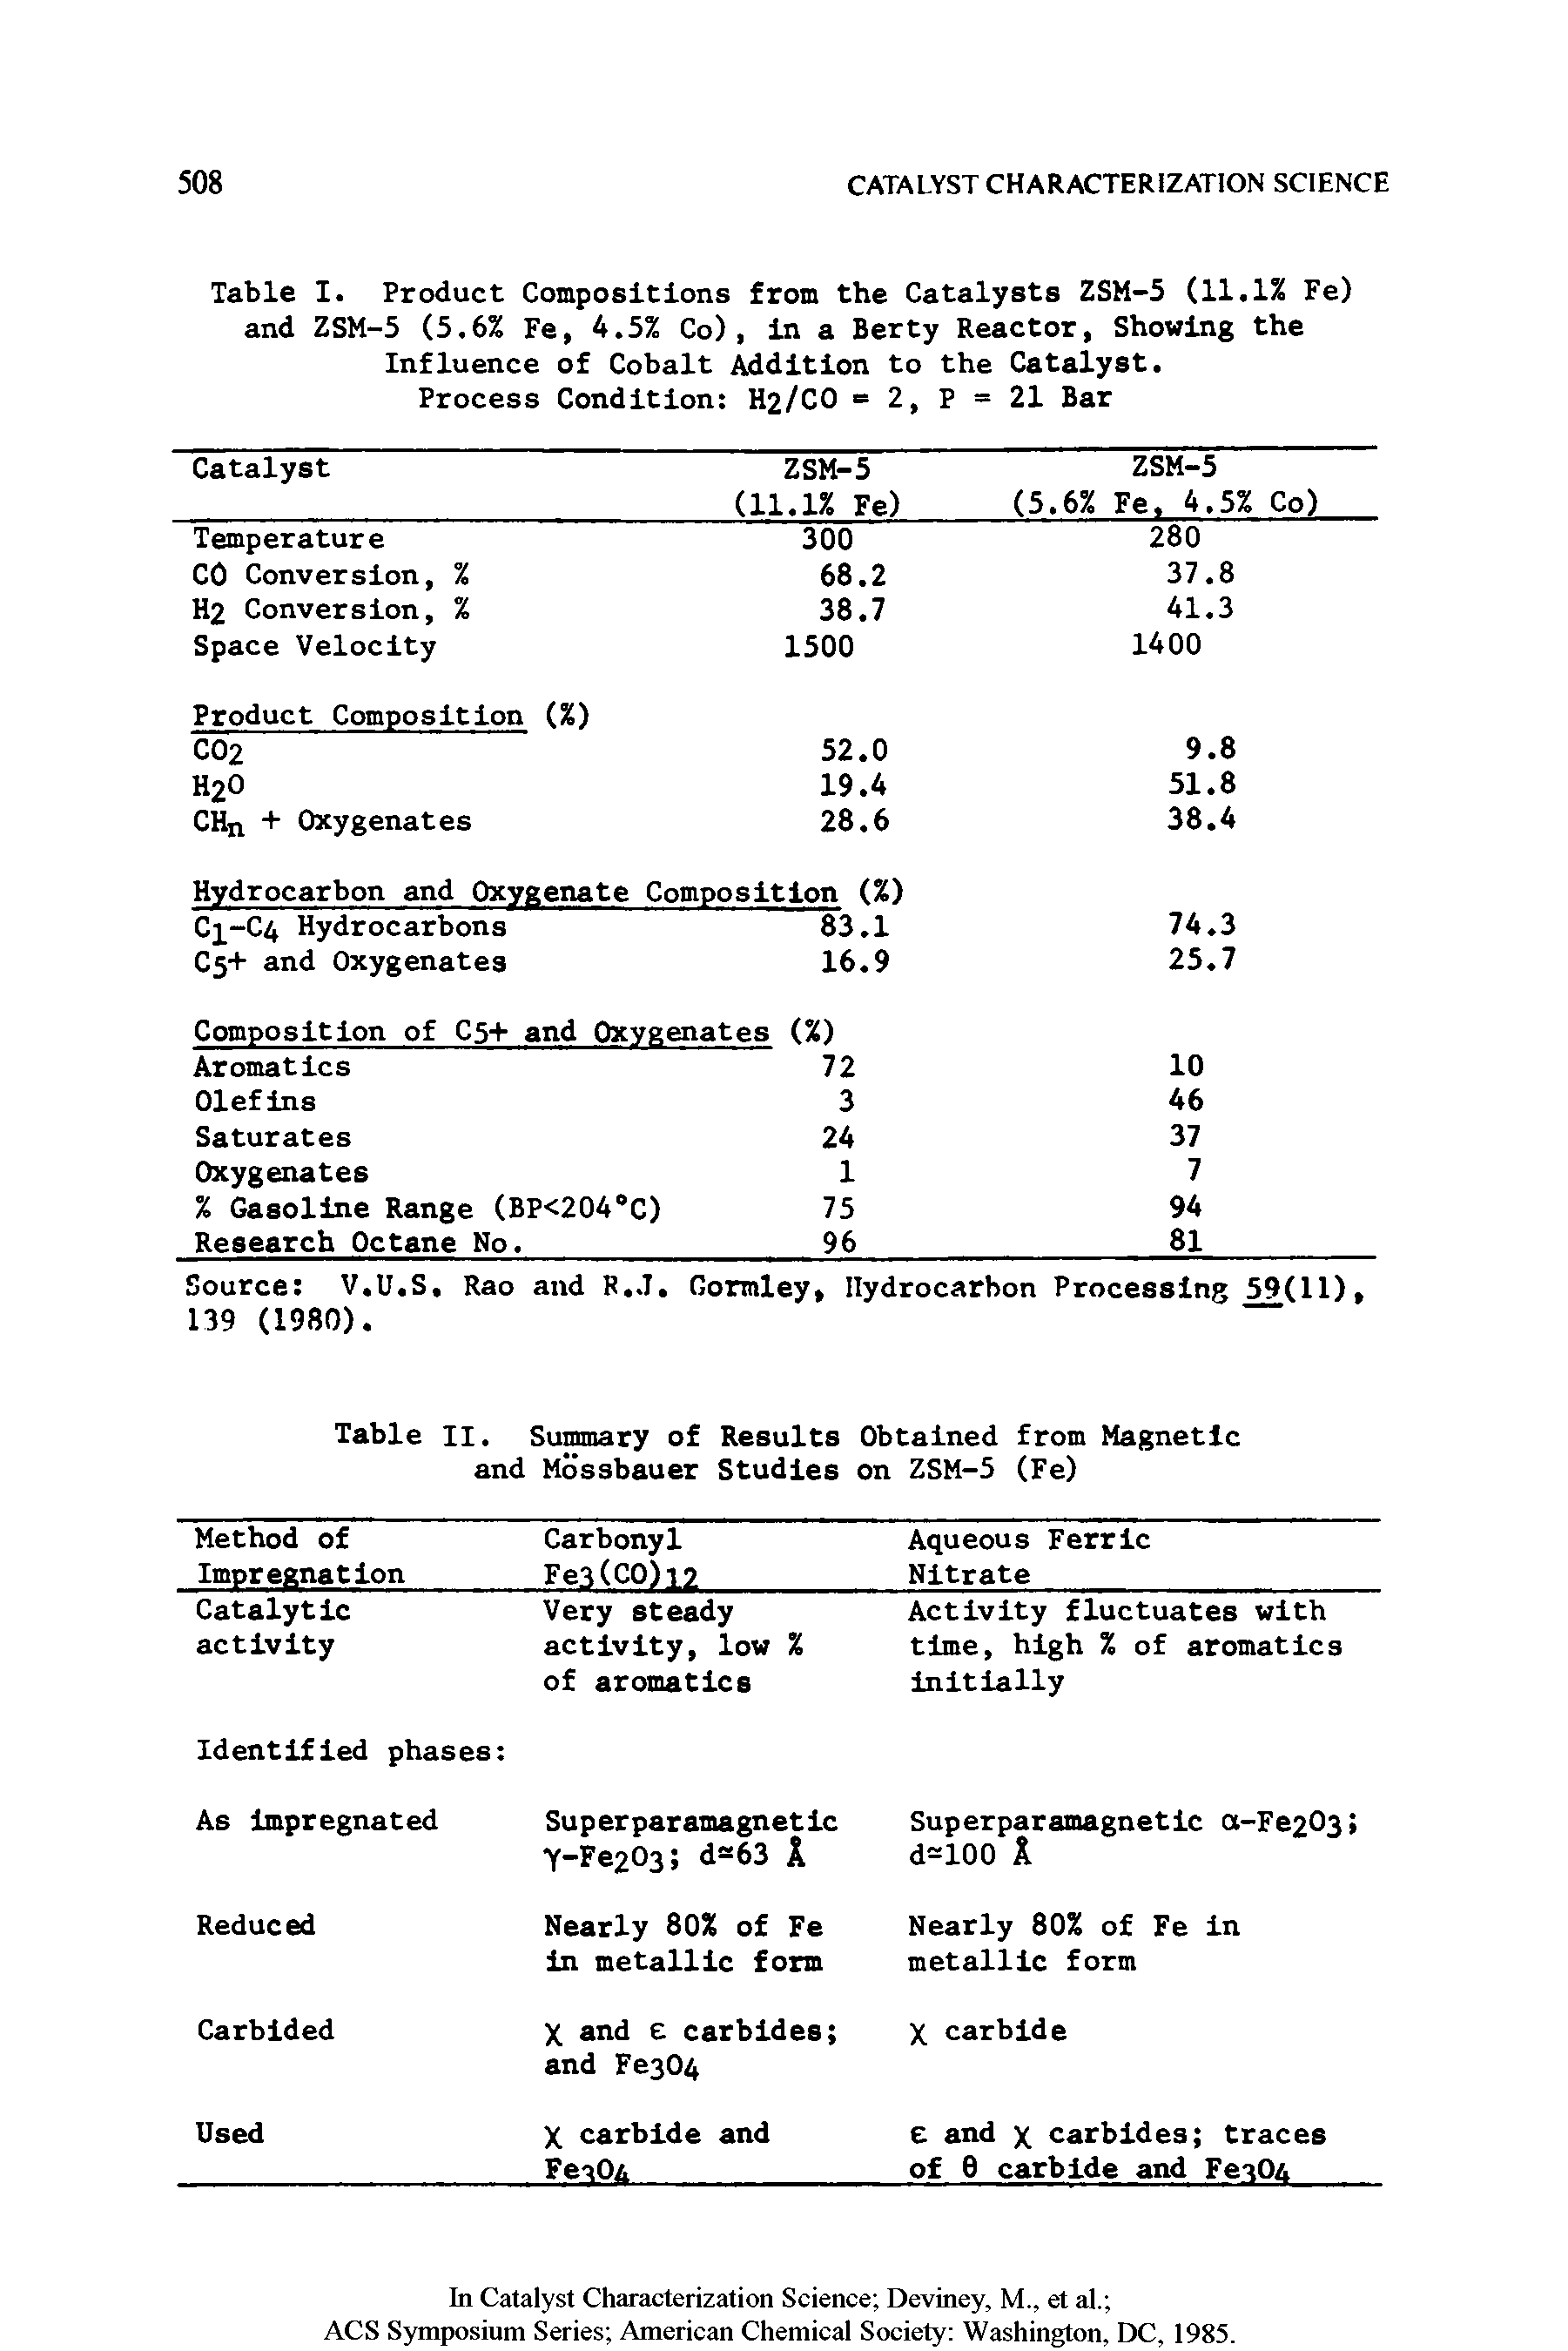 Table I. Product Compositions from the Catalysts ZSM-5 (11.1% Fe) and ZSM-5 (5.6% Fe, 4.5% Co), in a Berty Reactor, Showing the Influence of Cobalt Addition to the Catalyst.